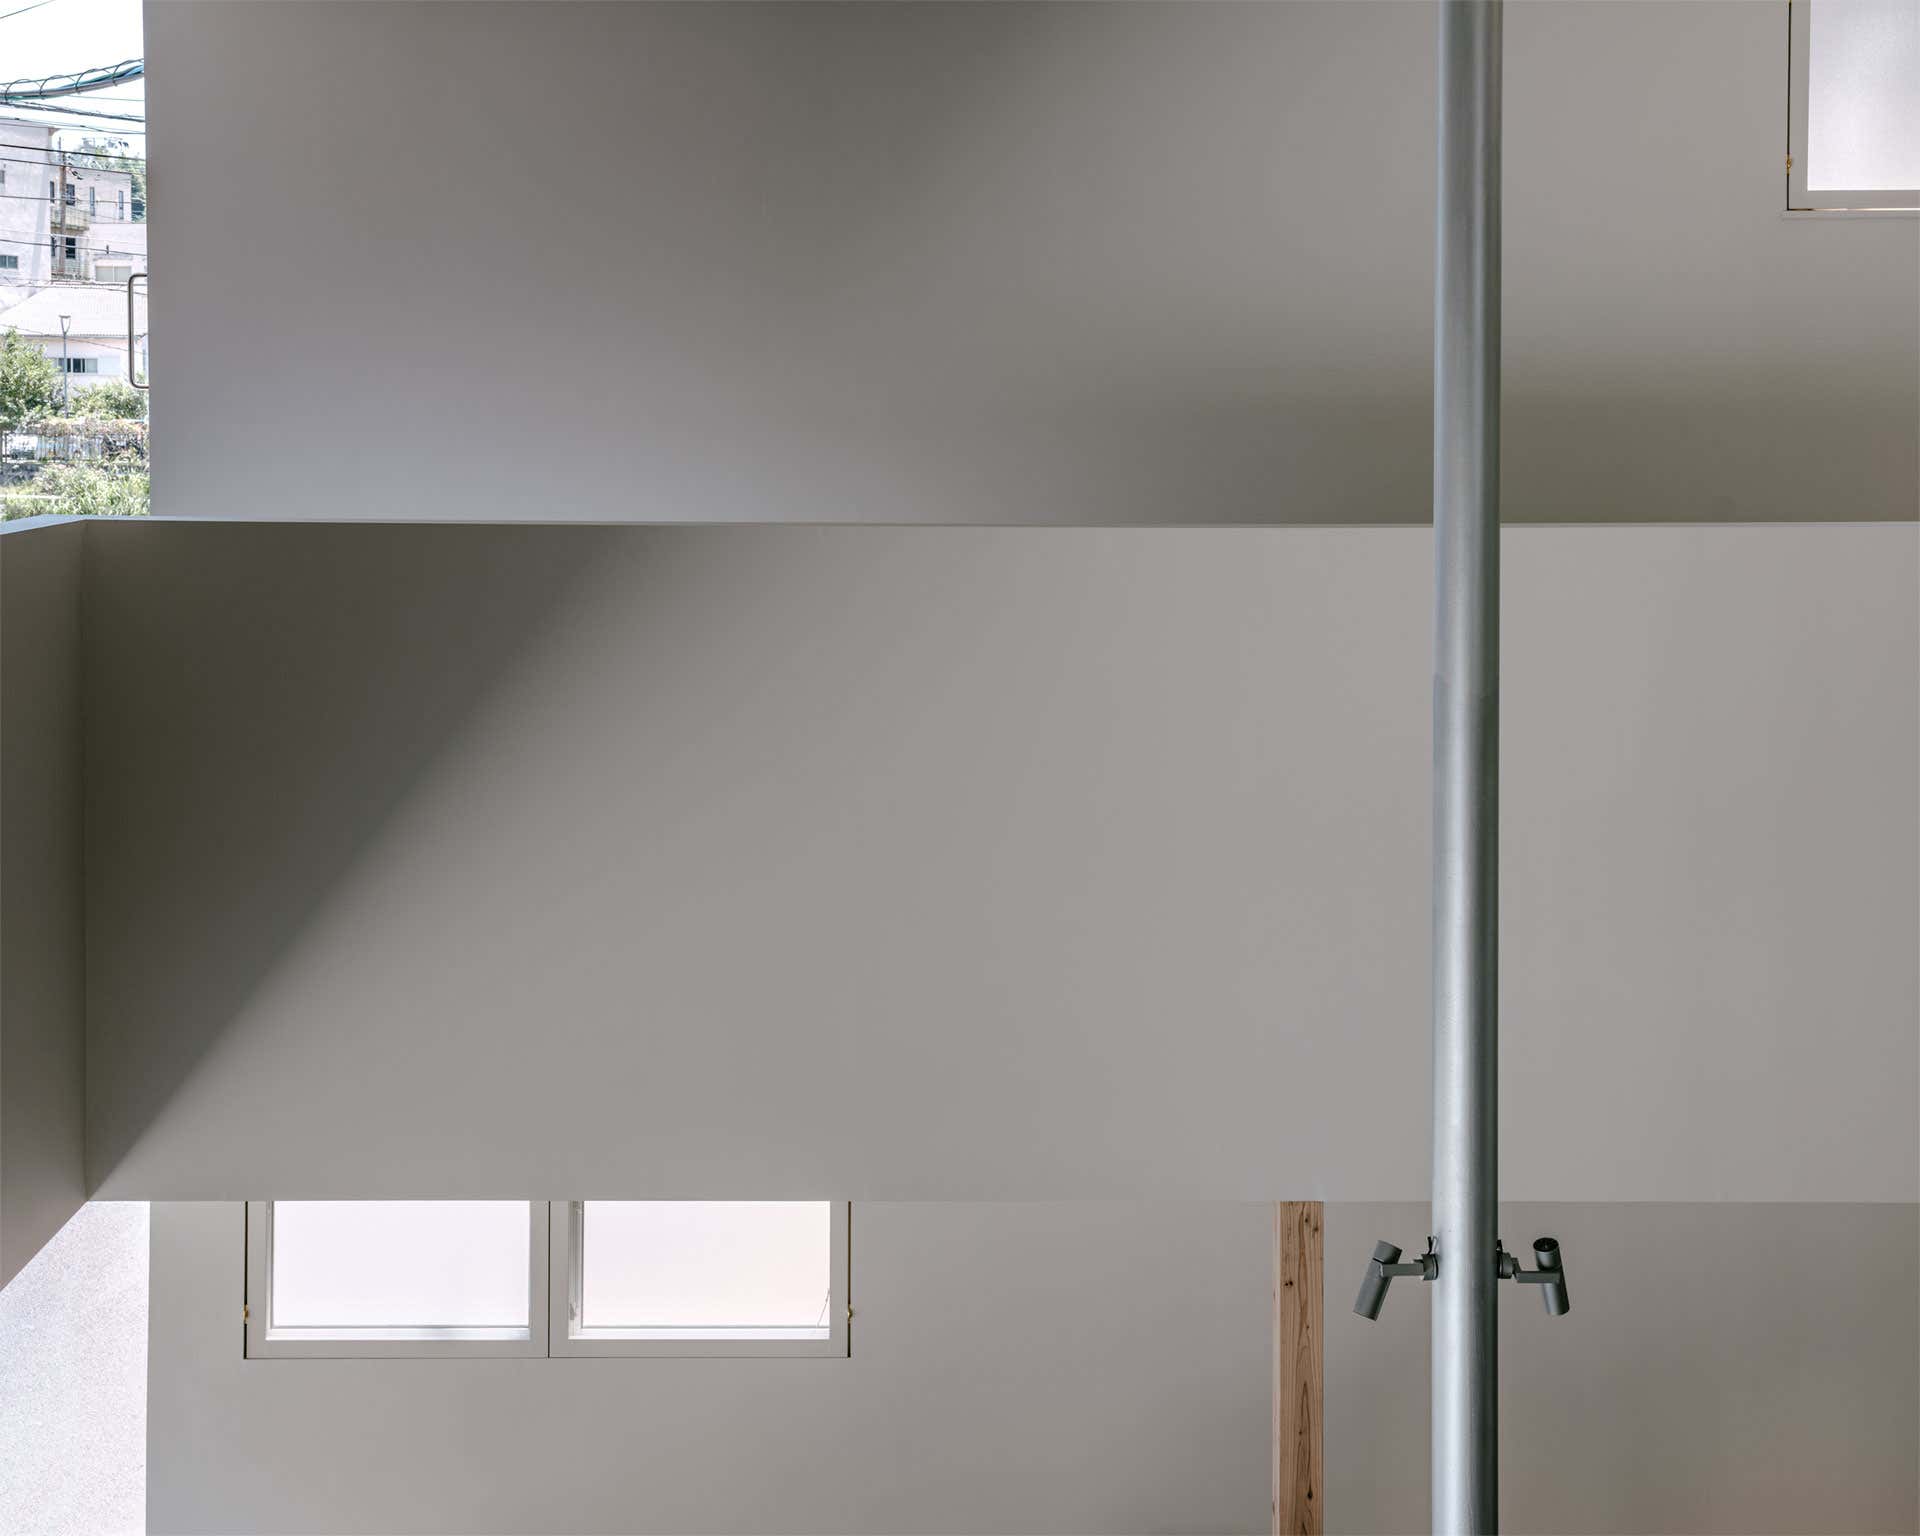 Minimalist Entry and Hall